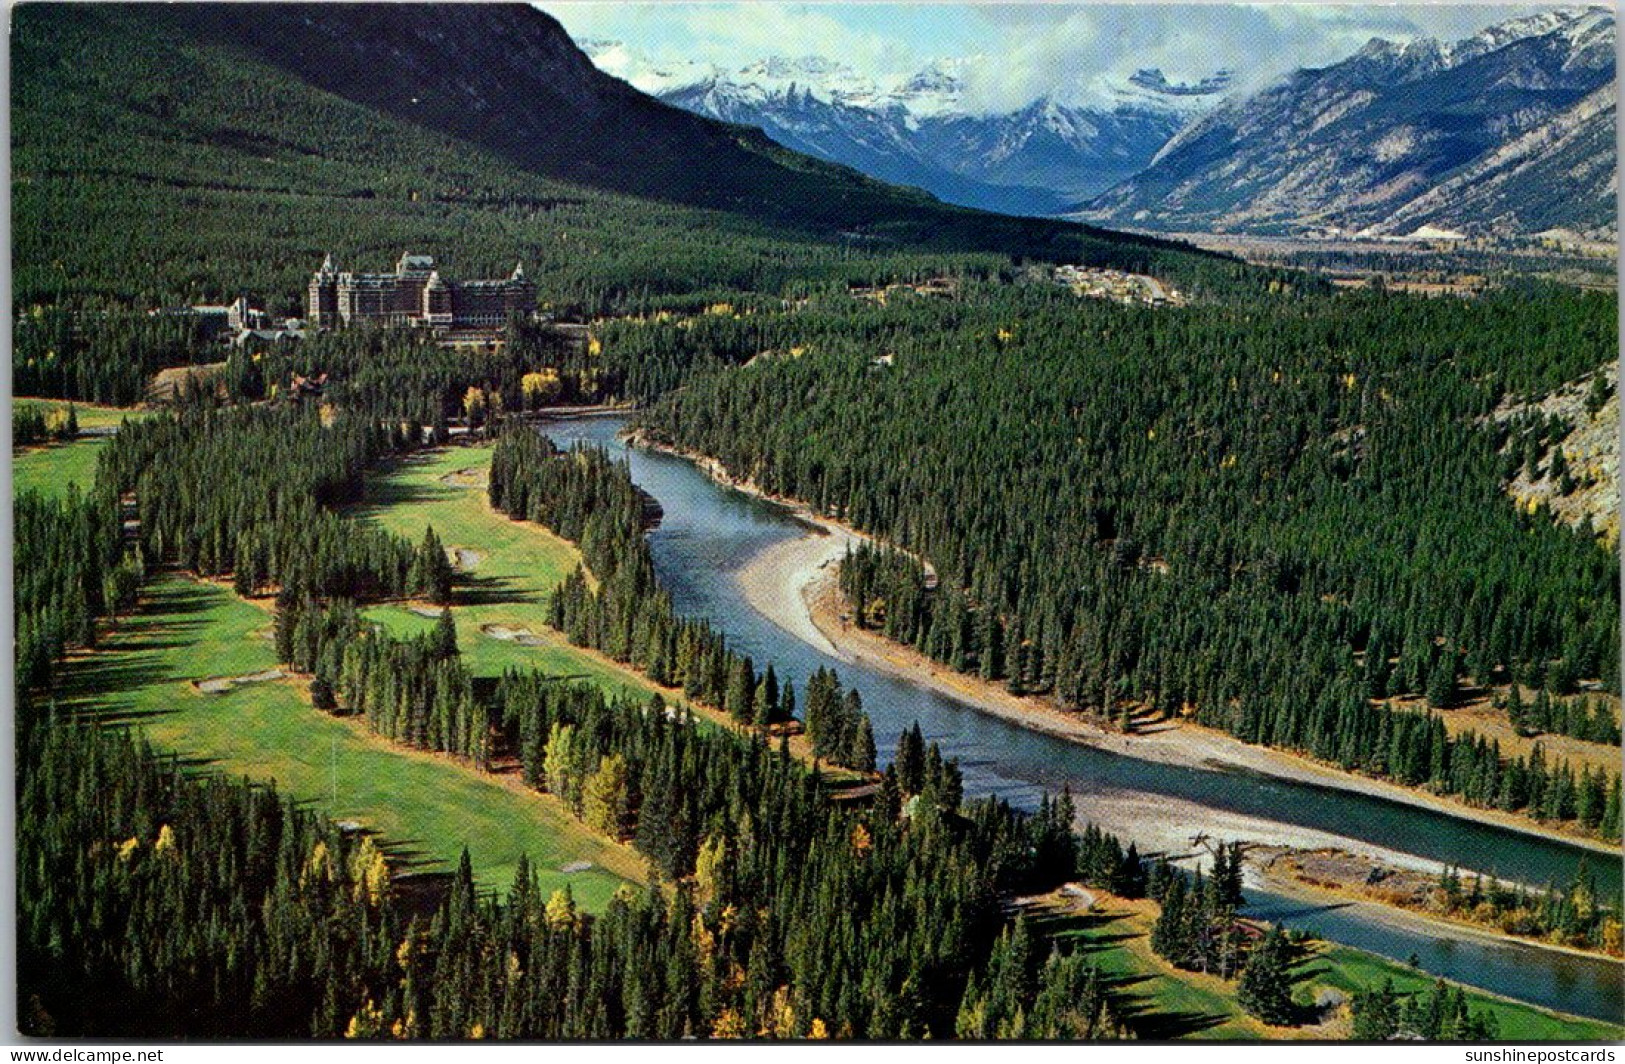 Canada Banff National Park Banff Springs Hotel Golf Course And Bow River - Banff